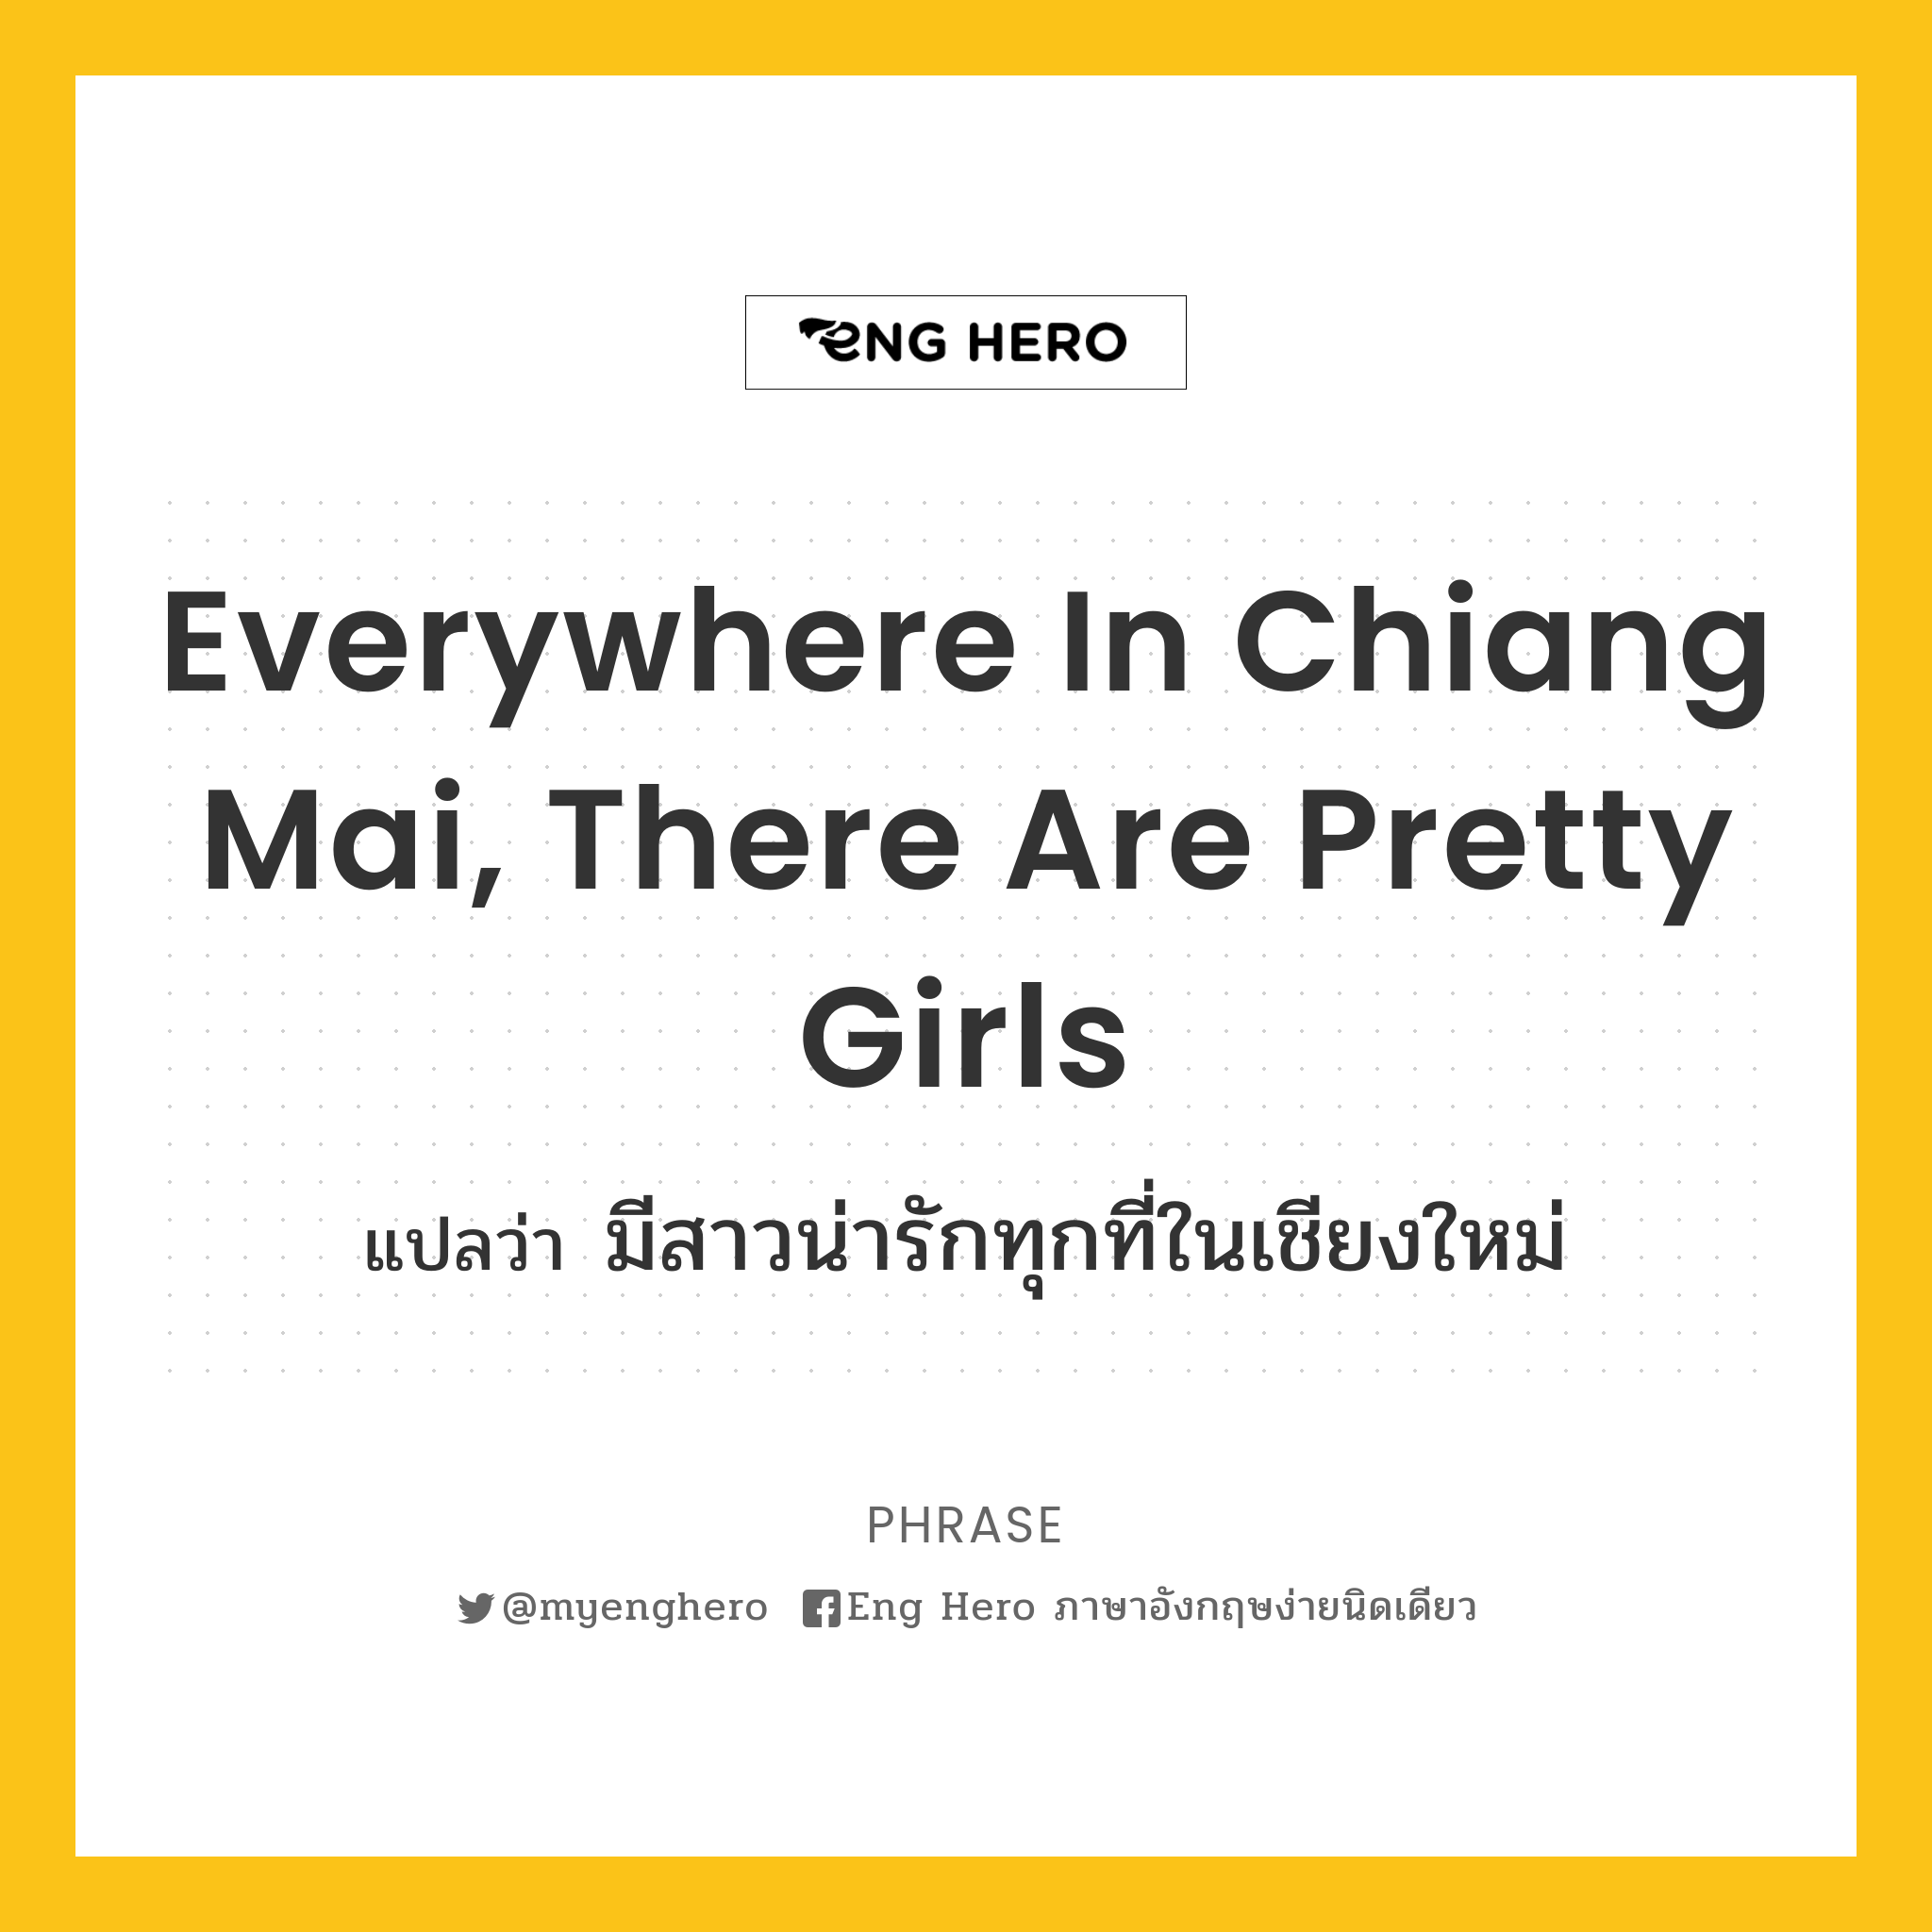 Everywhere in Chiang Mai, there are pretty girls